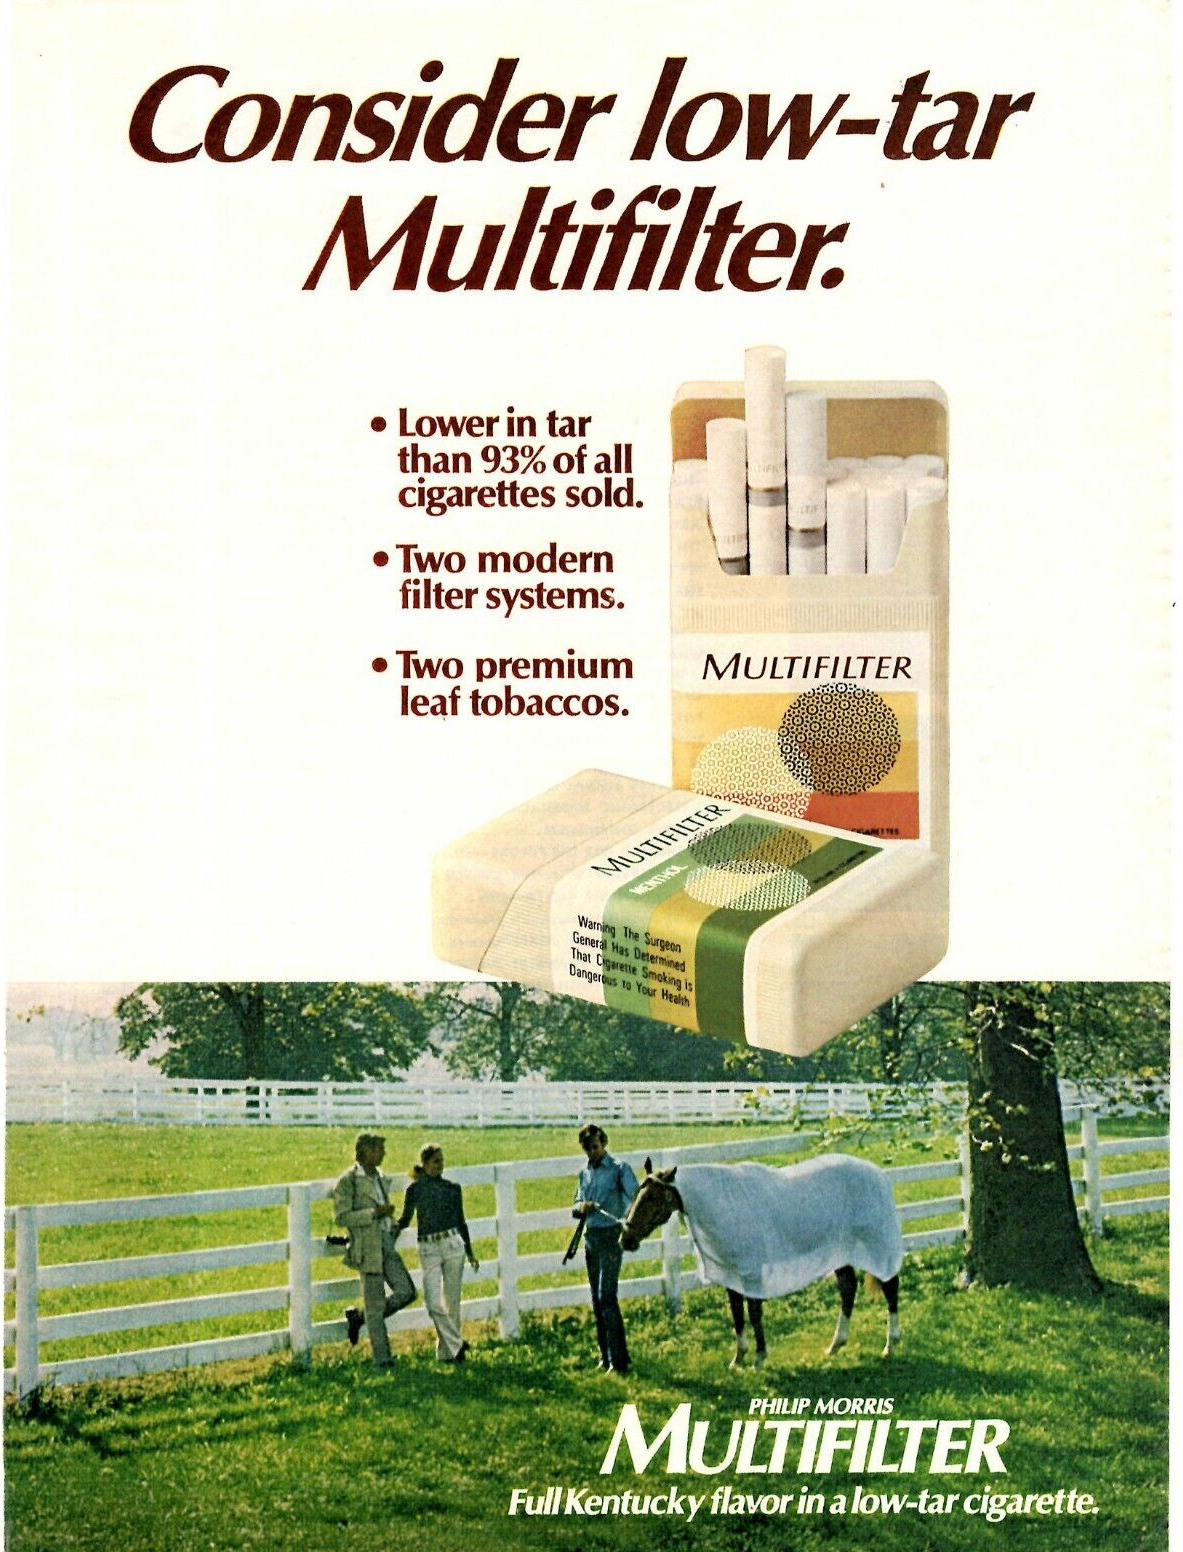 1972 Print Ad  Multifilter Full Kentucky flavor in a low-tar cigarette